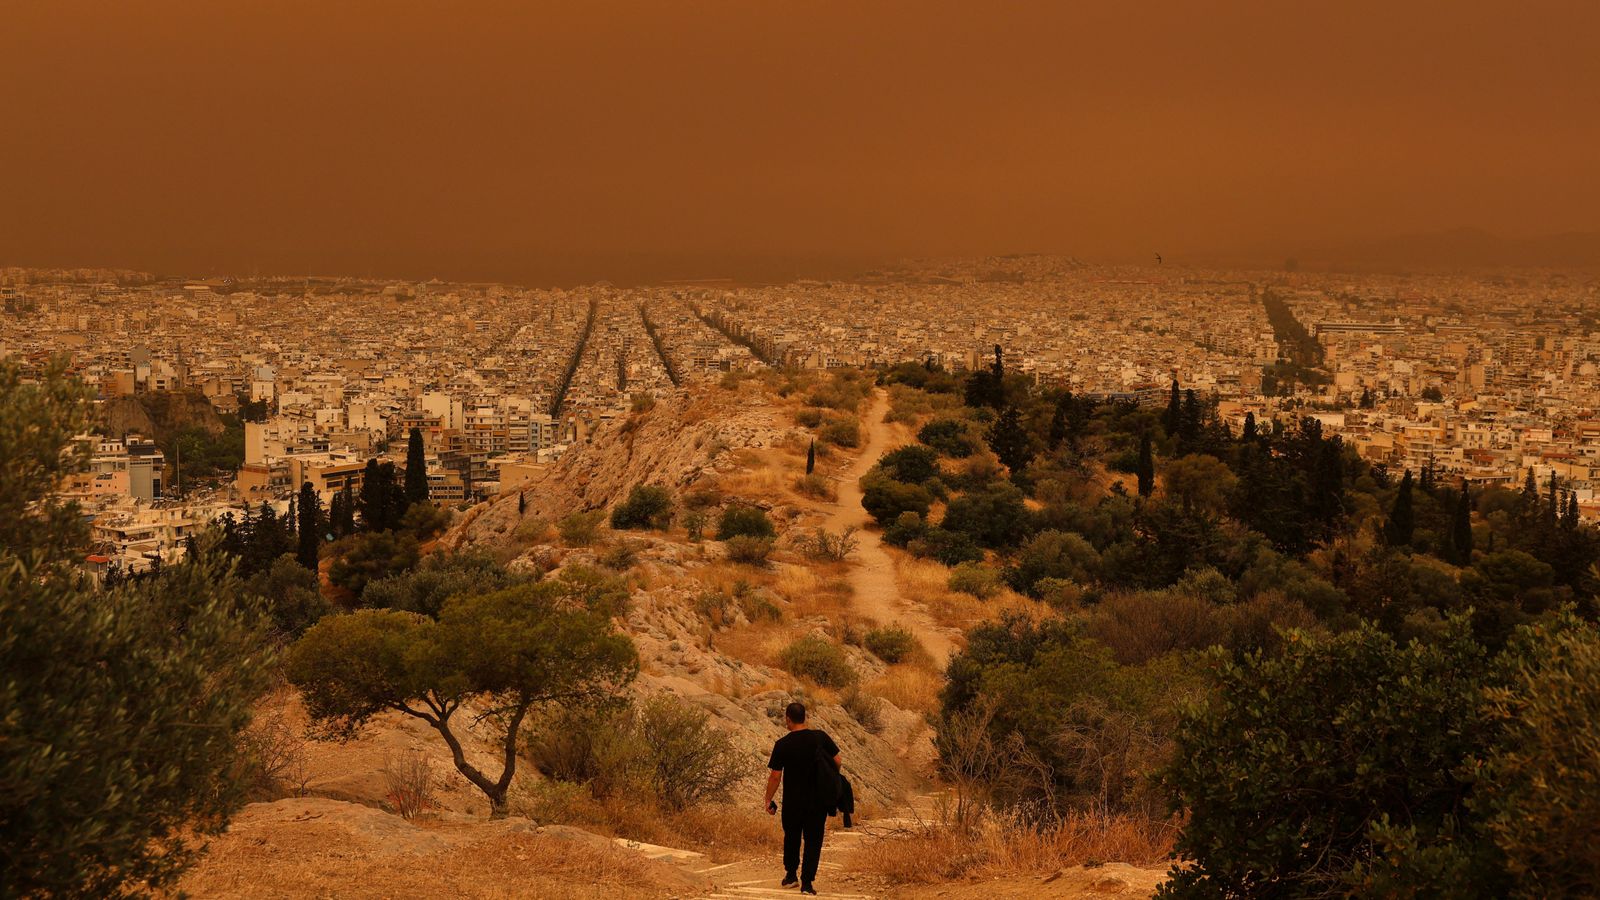 skies over athens turn 'apocalyptic' orange from sahara dust storm